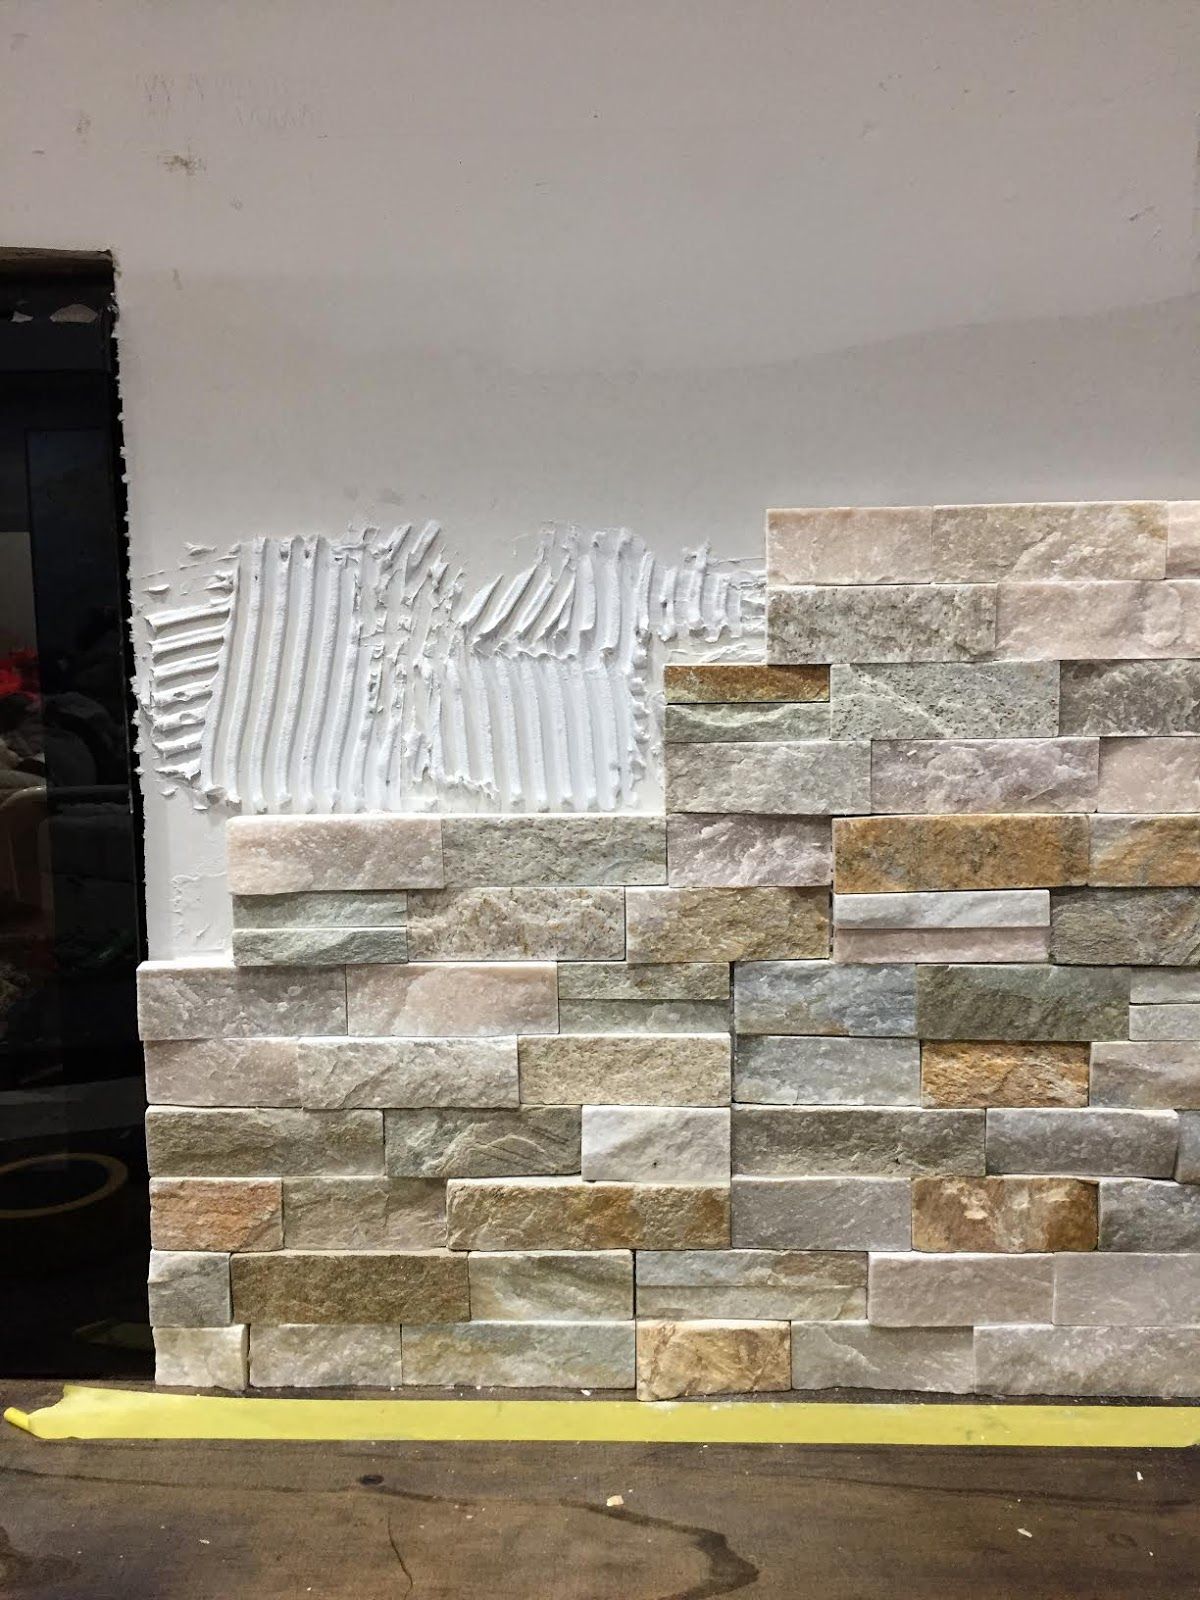 Built In Fireplace Ideas Inspirational How to Install Stacked Stone Tile On A Fireplace Wall